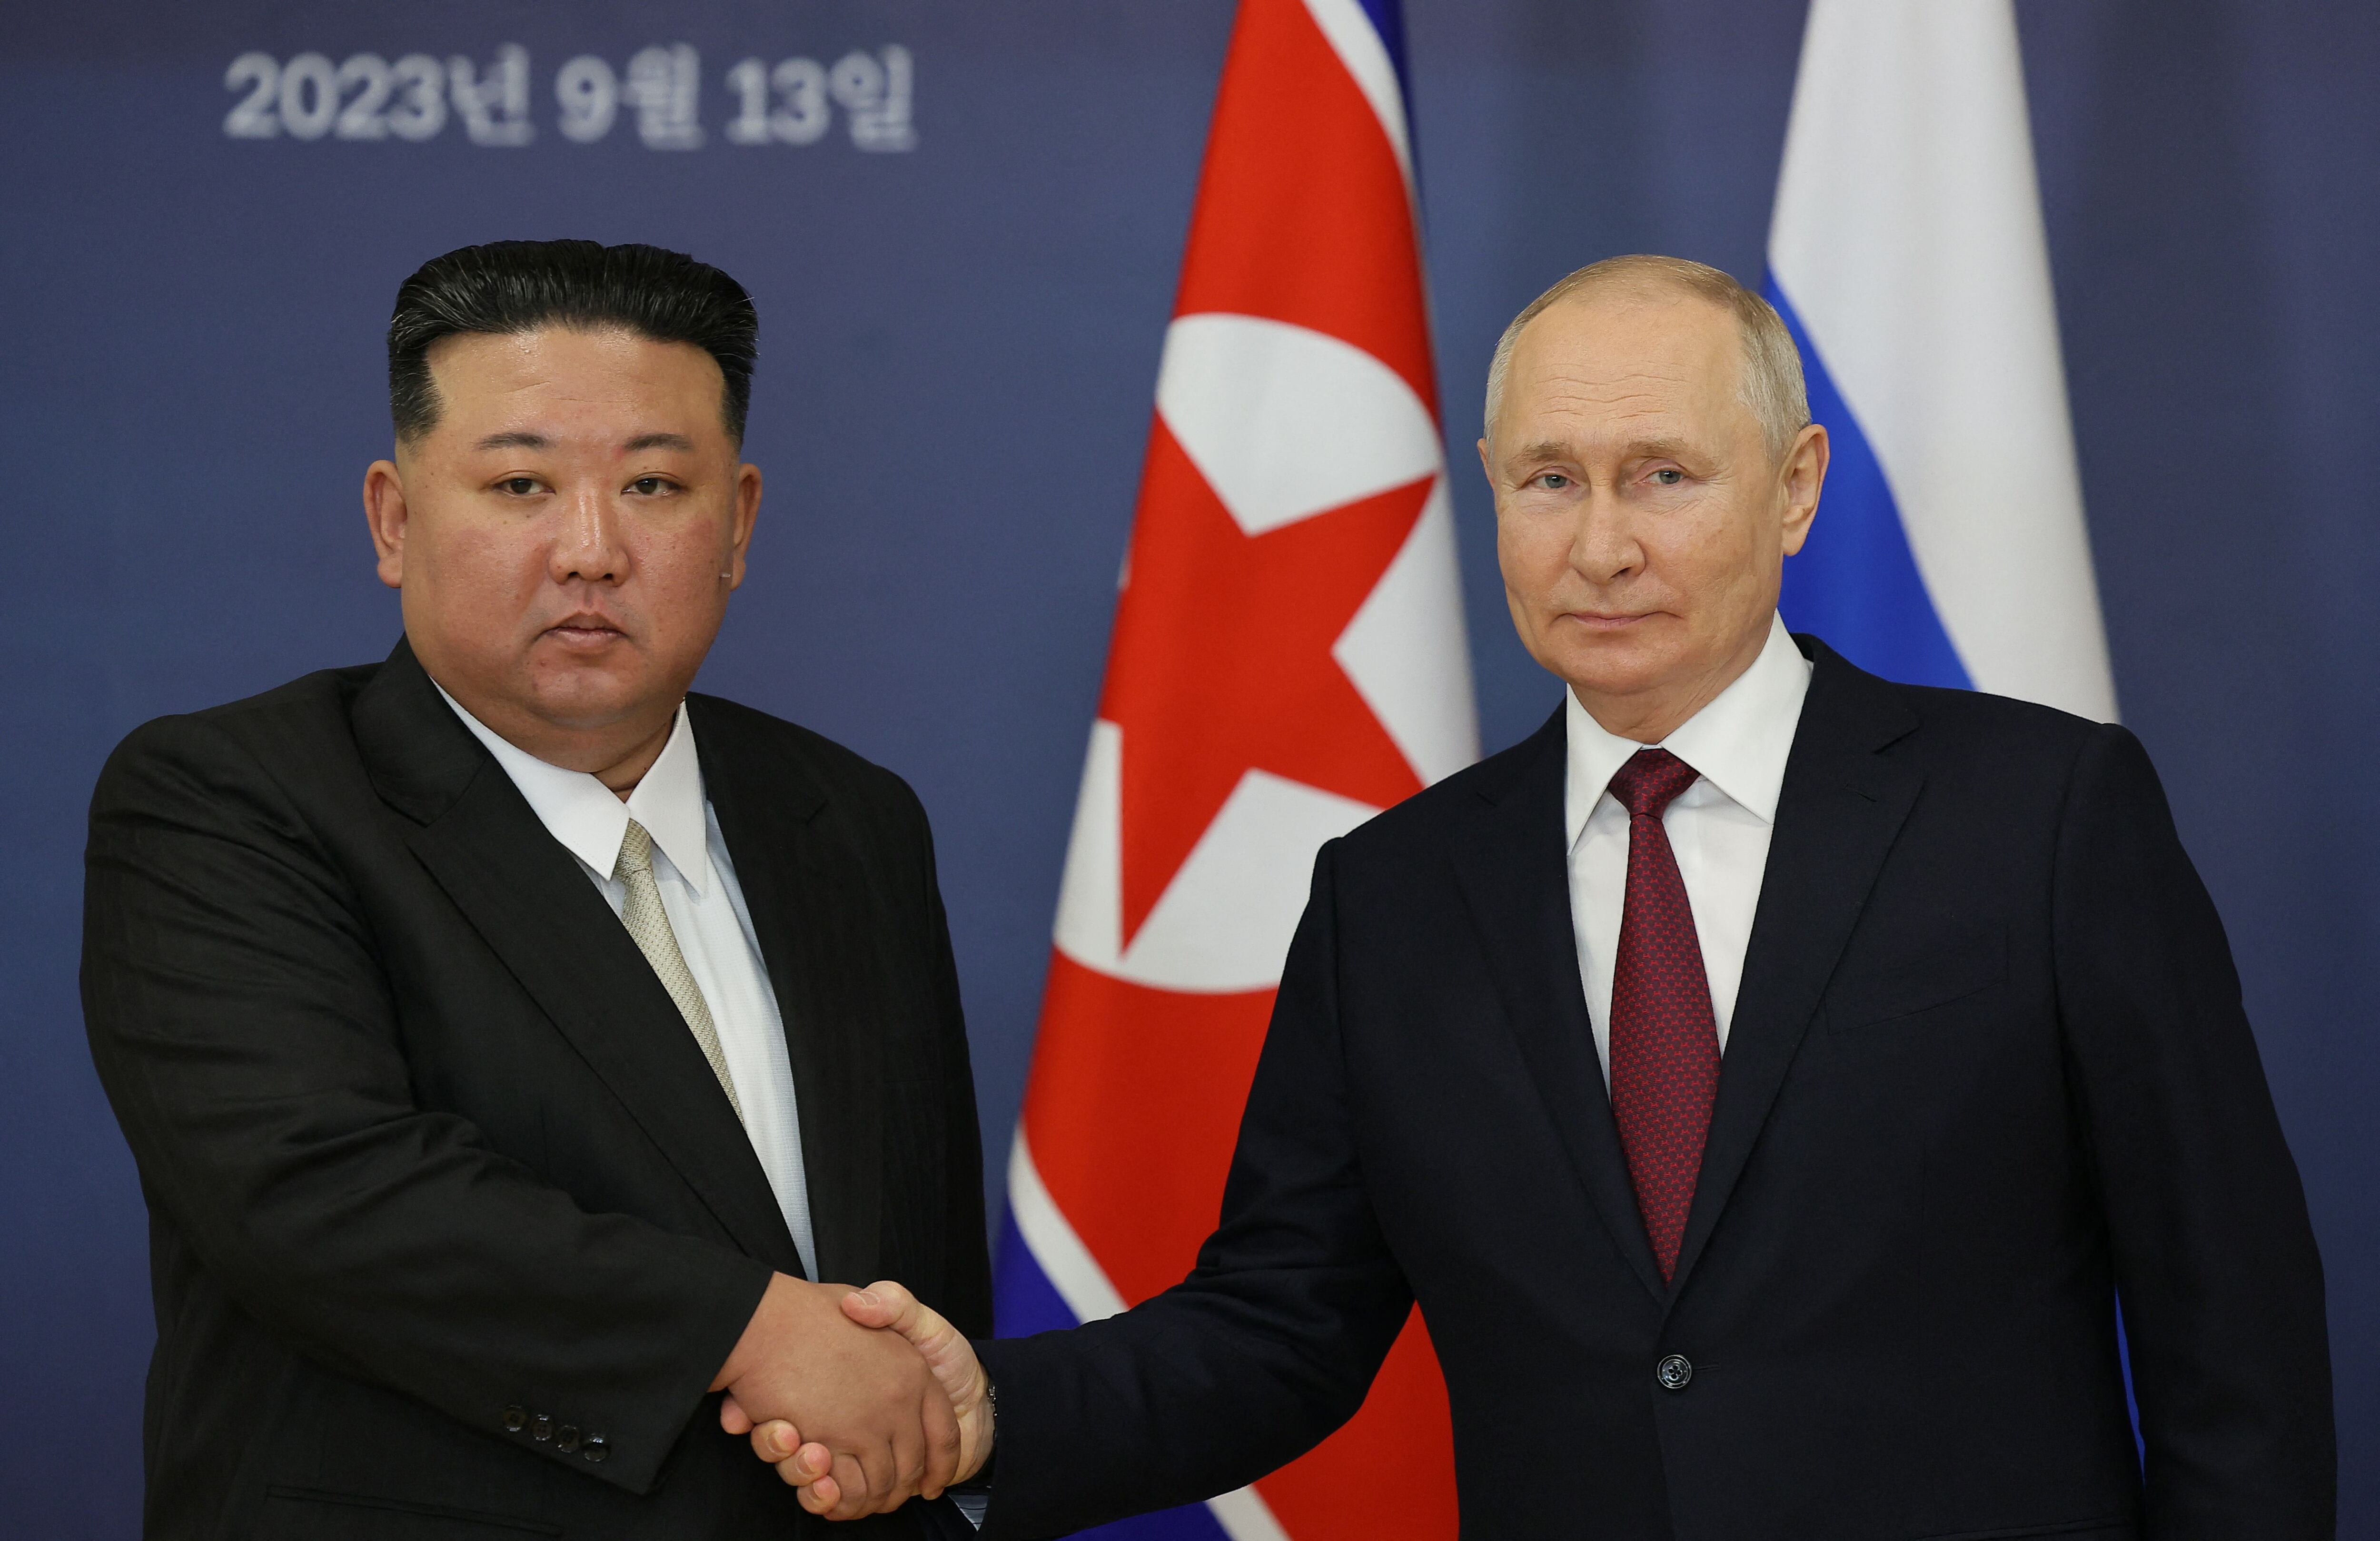 Both leaders strengthened their ties of cooperation: (Photo: AFP).